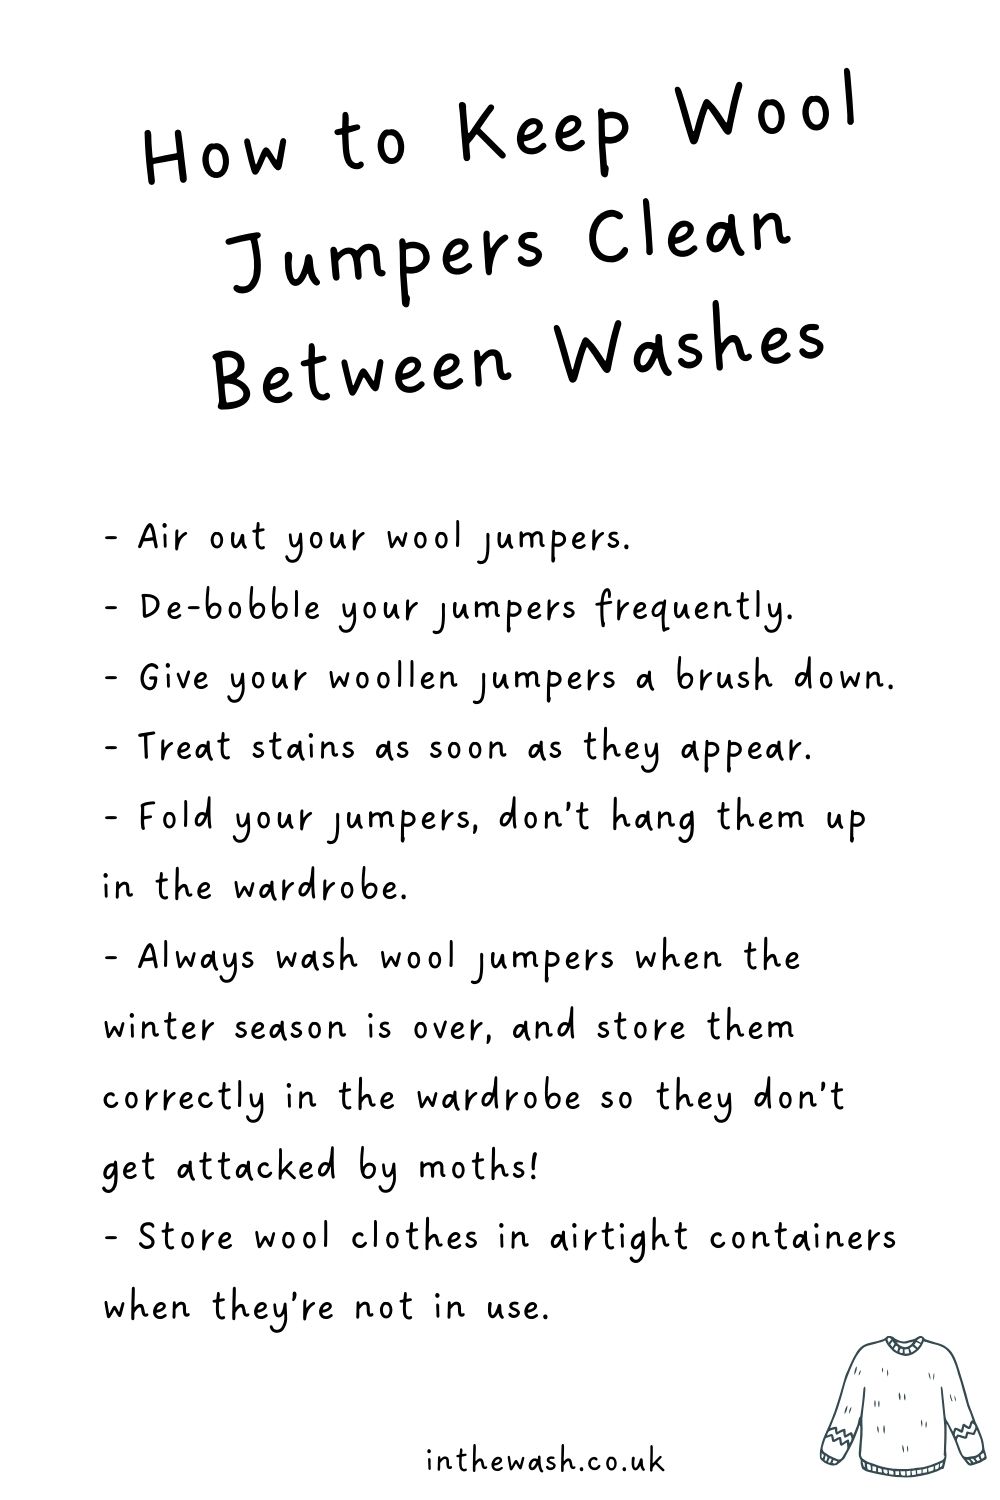 How to keep wool jumpers clean between washes